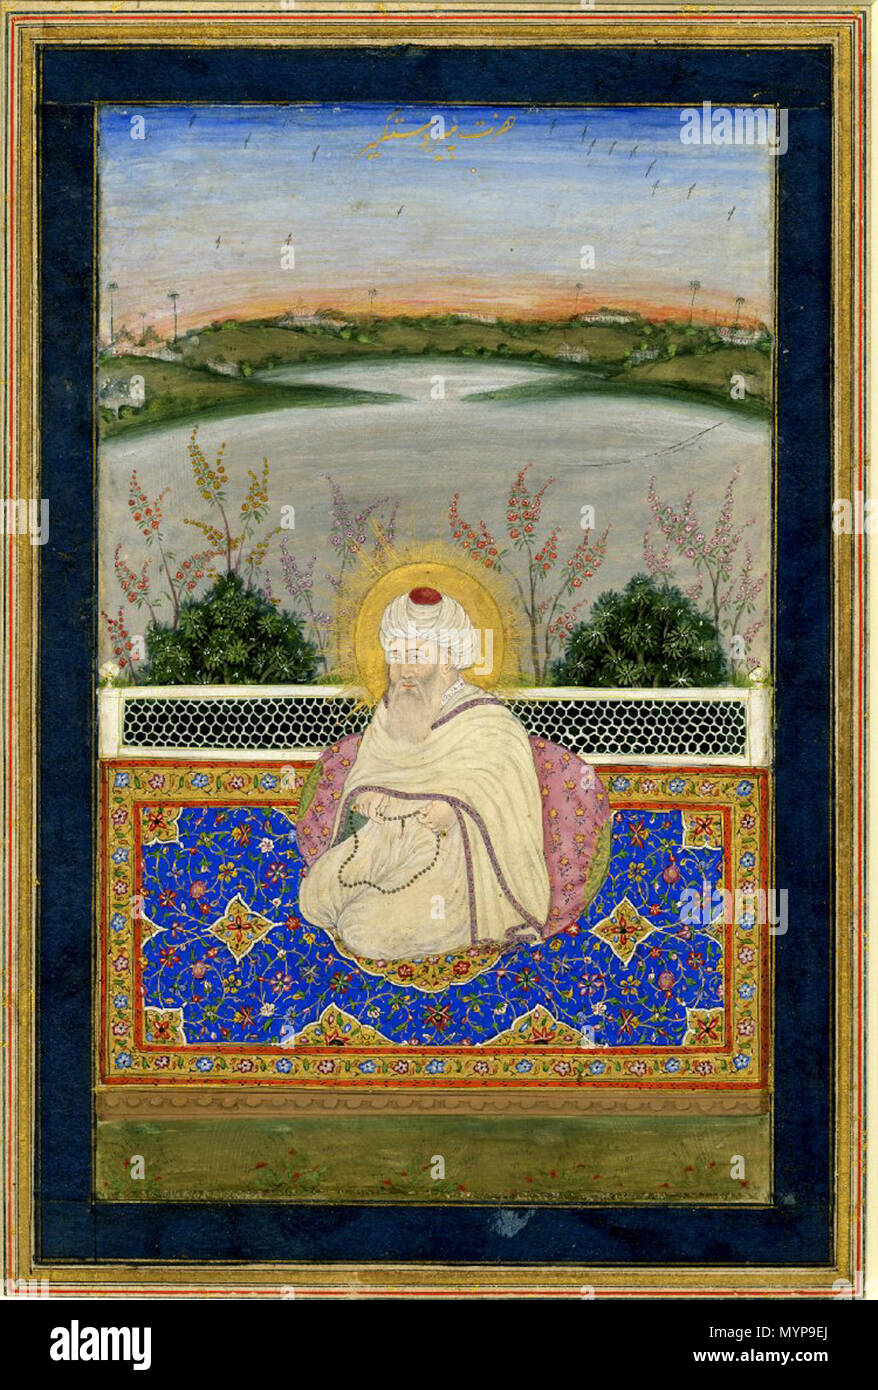 . English: Pir Dastgir India, Mughal School, Late 18th century Opaque watercolour on paper Posthumous portraits of important religious and political figures were very popular in 18th-century Mughal India. This figure would have been a pir, the founder of a dervish order, but it is not now certain to which group he belonged. late 18th century. Mughal Style 424 Pir Dastgir Stock Photo